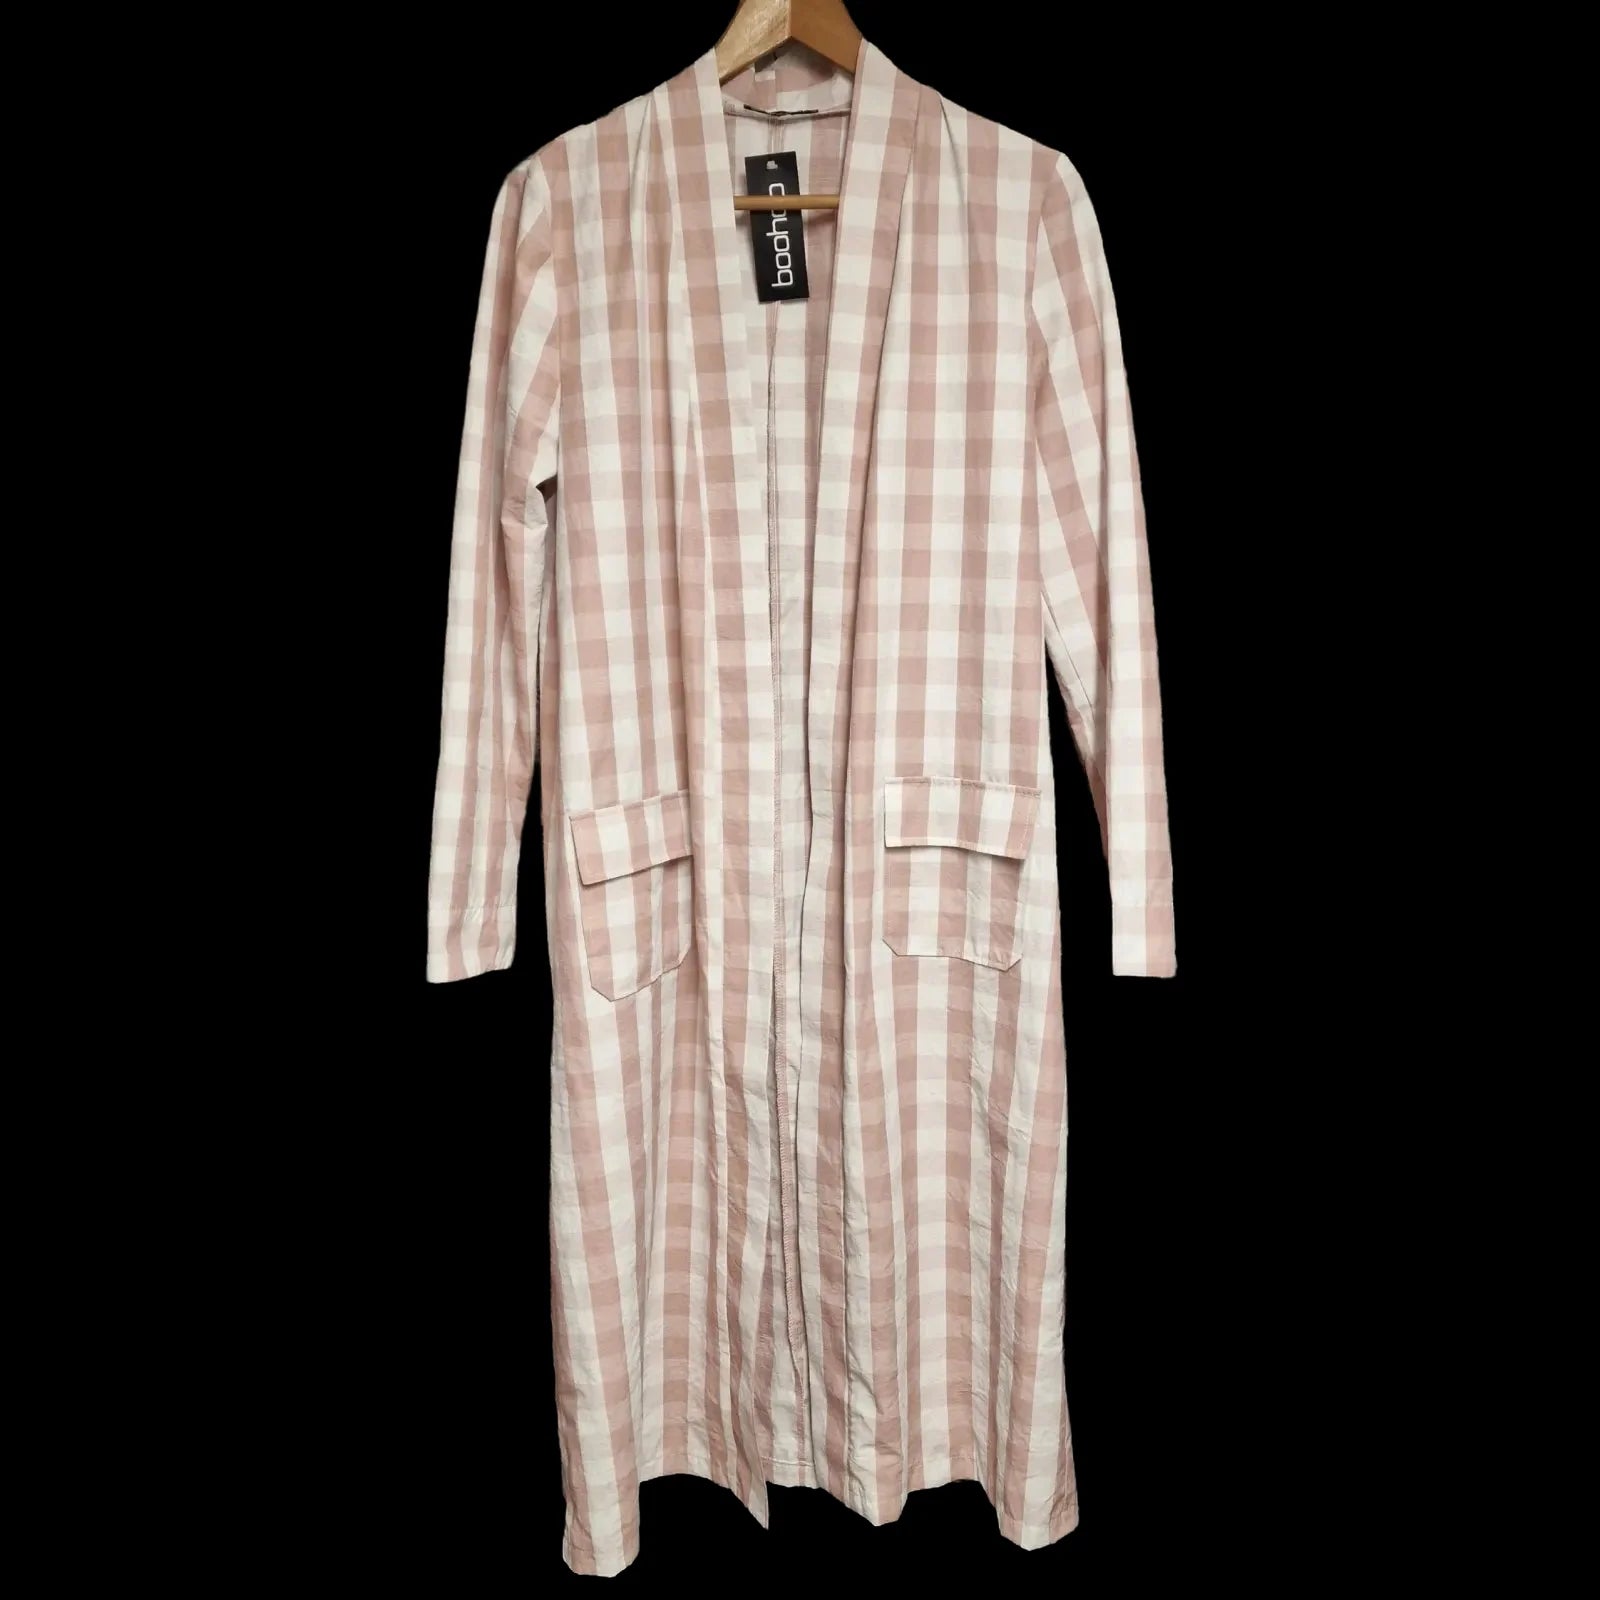 New Womens Boohoo Pink White Woven Gingham Longline Duster